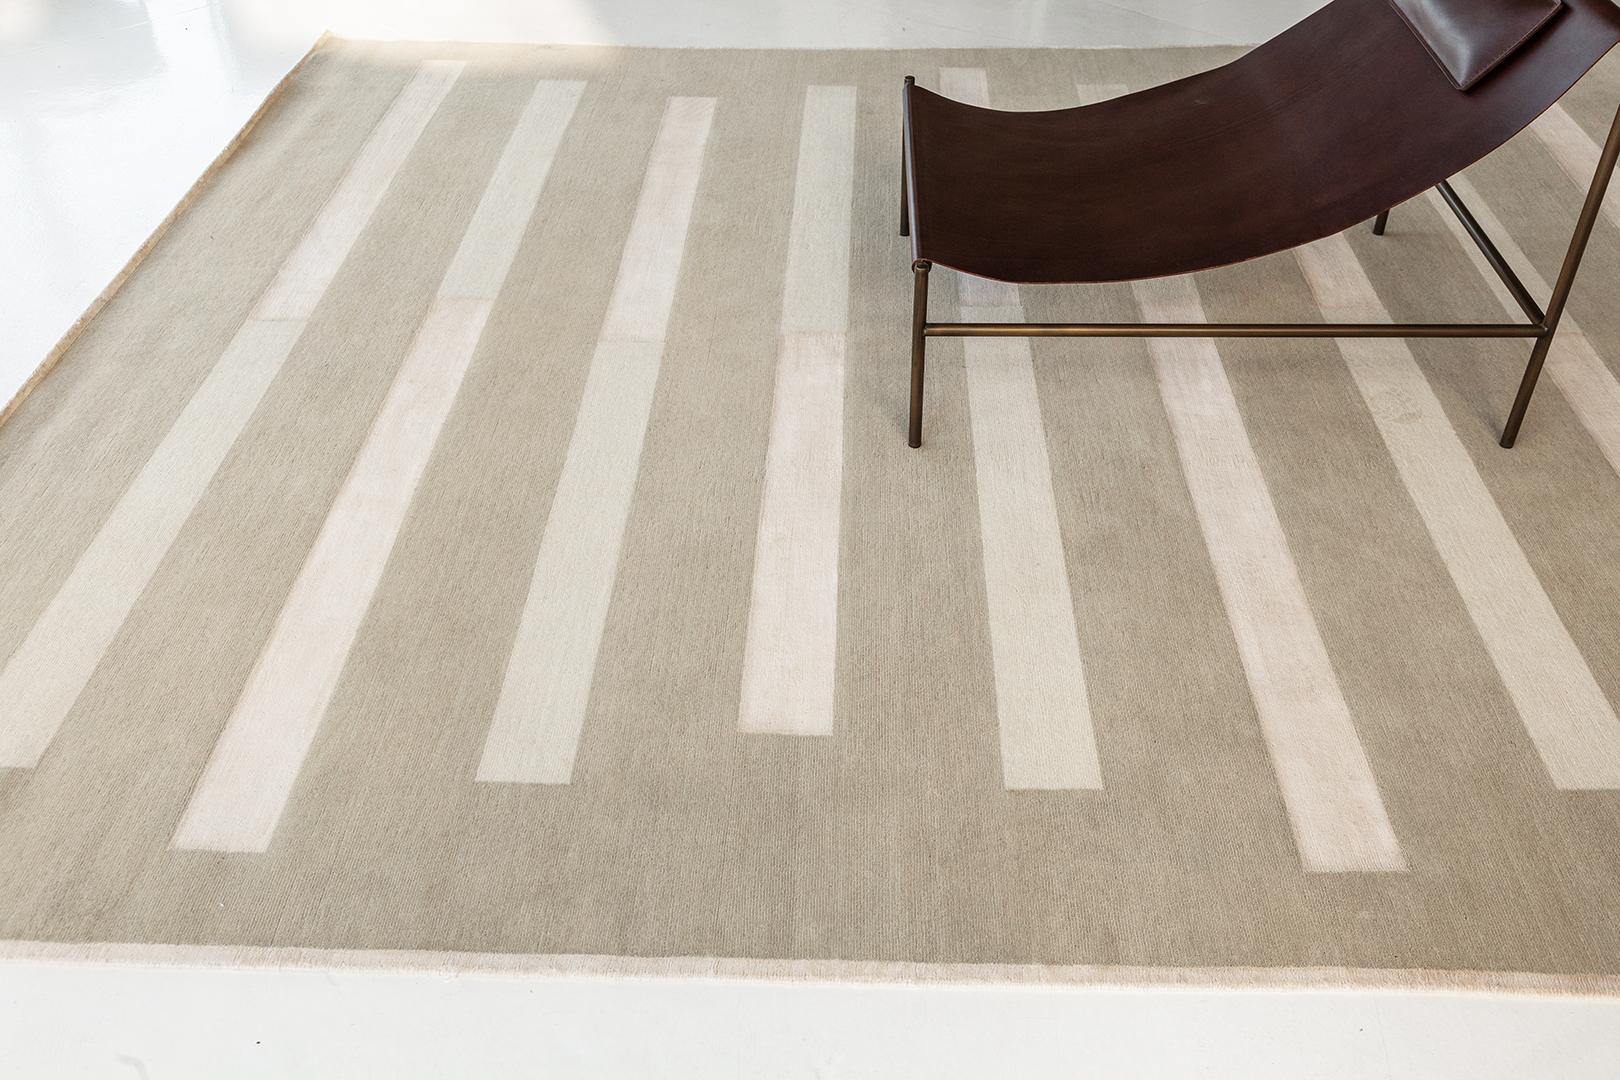 Entrée offers a classic grounding linear pattern, providing structure to any room. The simple transition from wool to silk in a singular line offers visual and tactile texture. Entrée is a study of linear composition and textural exploration.

Erica